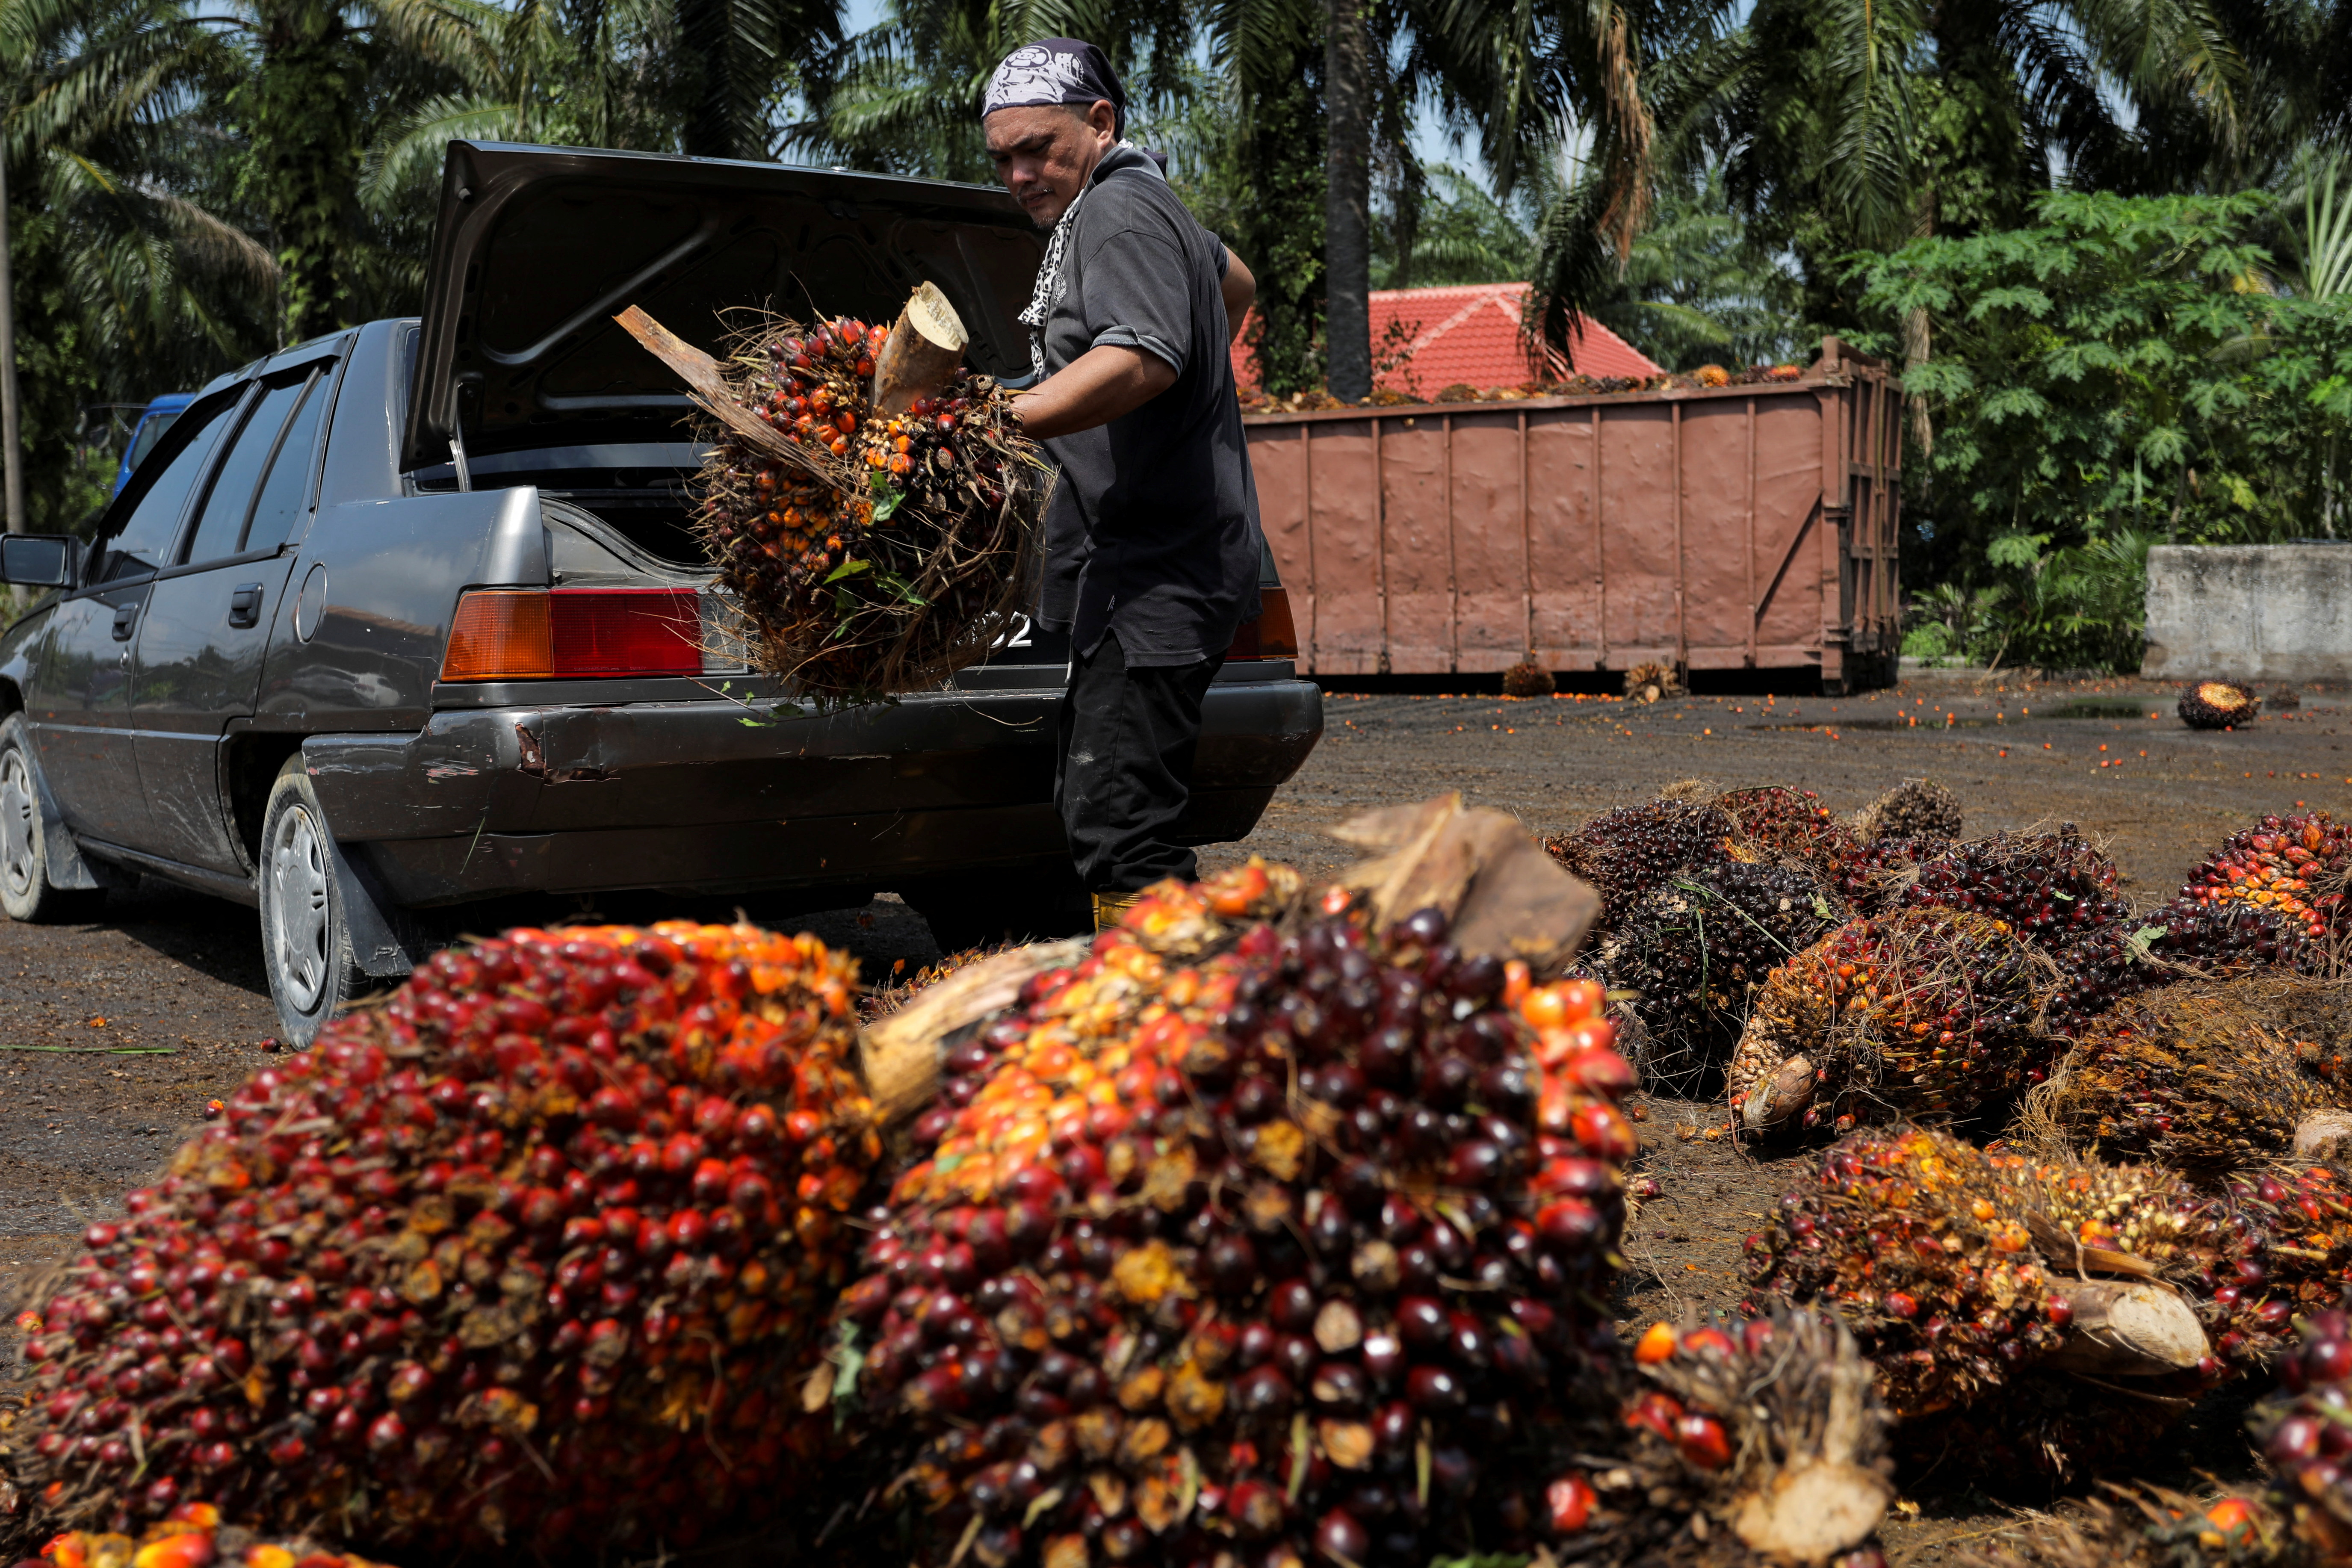 Amid migrant labour shortage lone farmers hurdle to harvest palm fruits in Malyasia